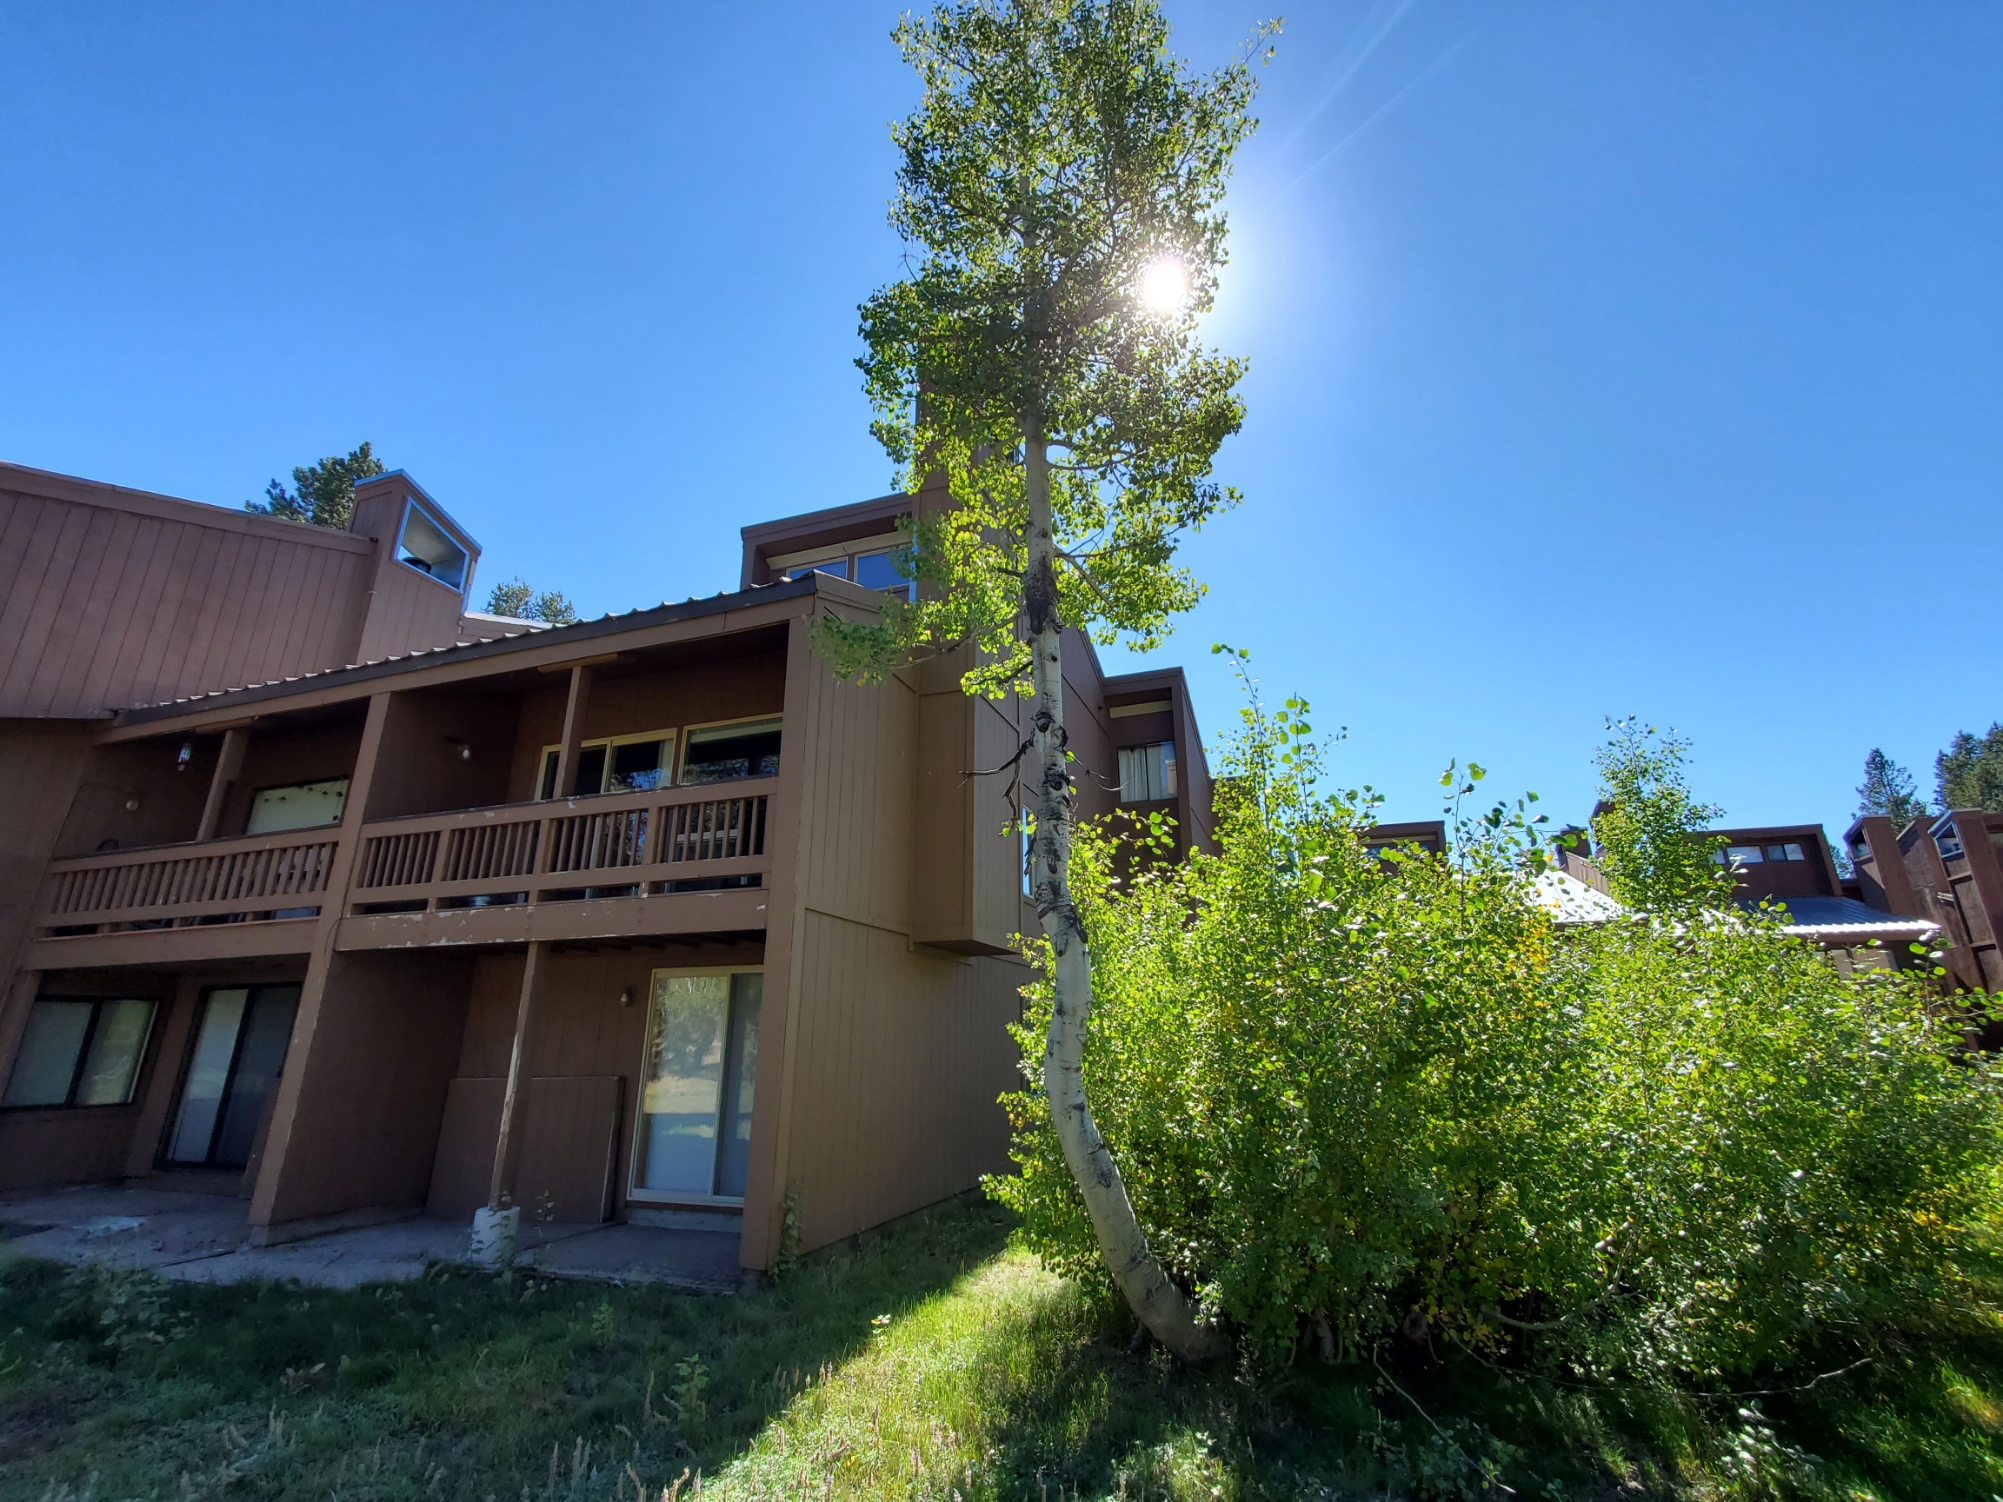 LARGE CREEKSIDE CONDO WITH GARAGE